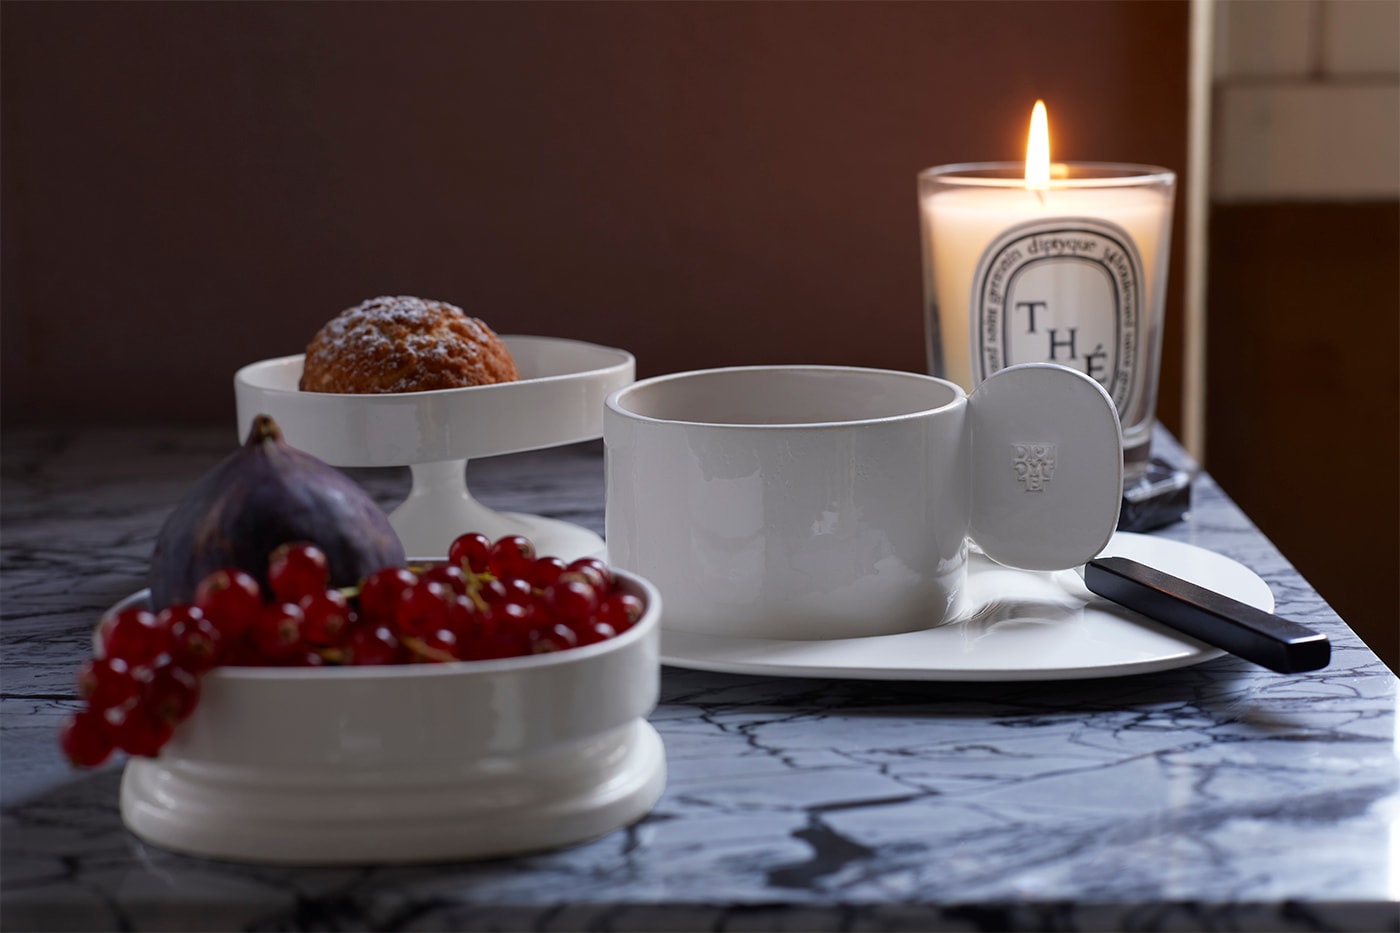 Diptyque Launches "Simple Objects" Collection in Celebration of the Candle